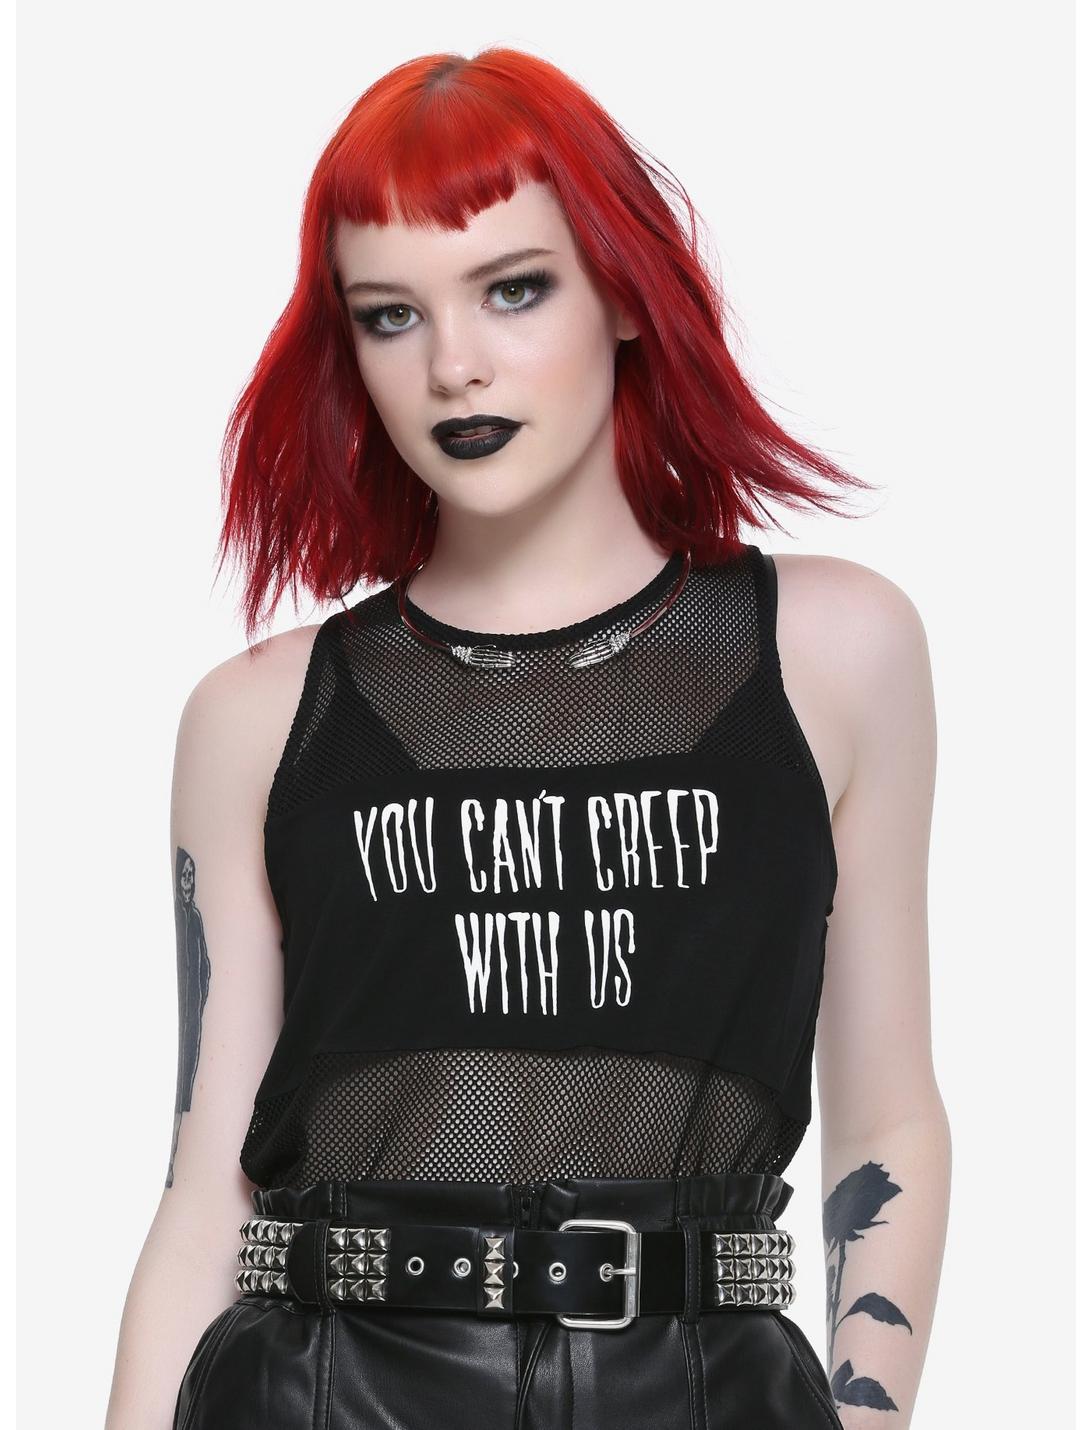 BlackCraft Creep With Us Inset Girls Fishnet Tank Top Hot Topic Exclusive, BLACK, hi-res